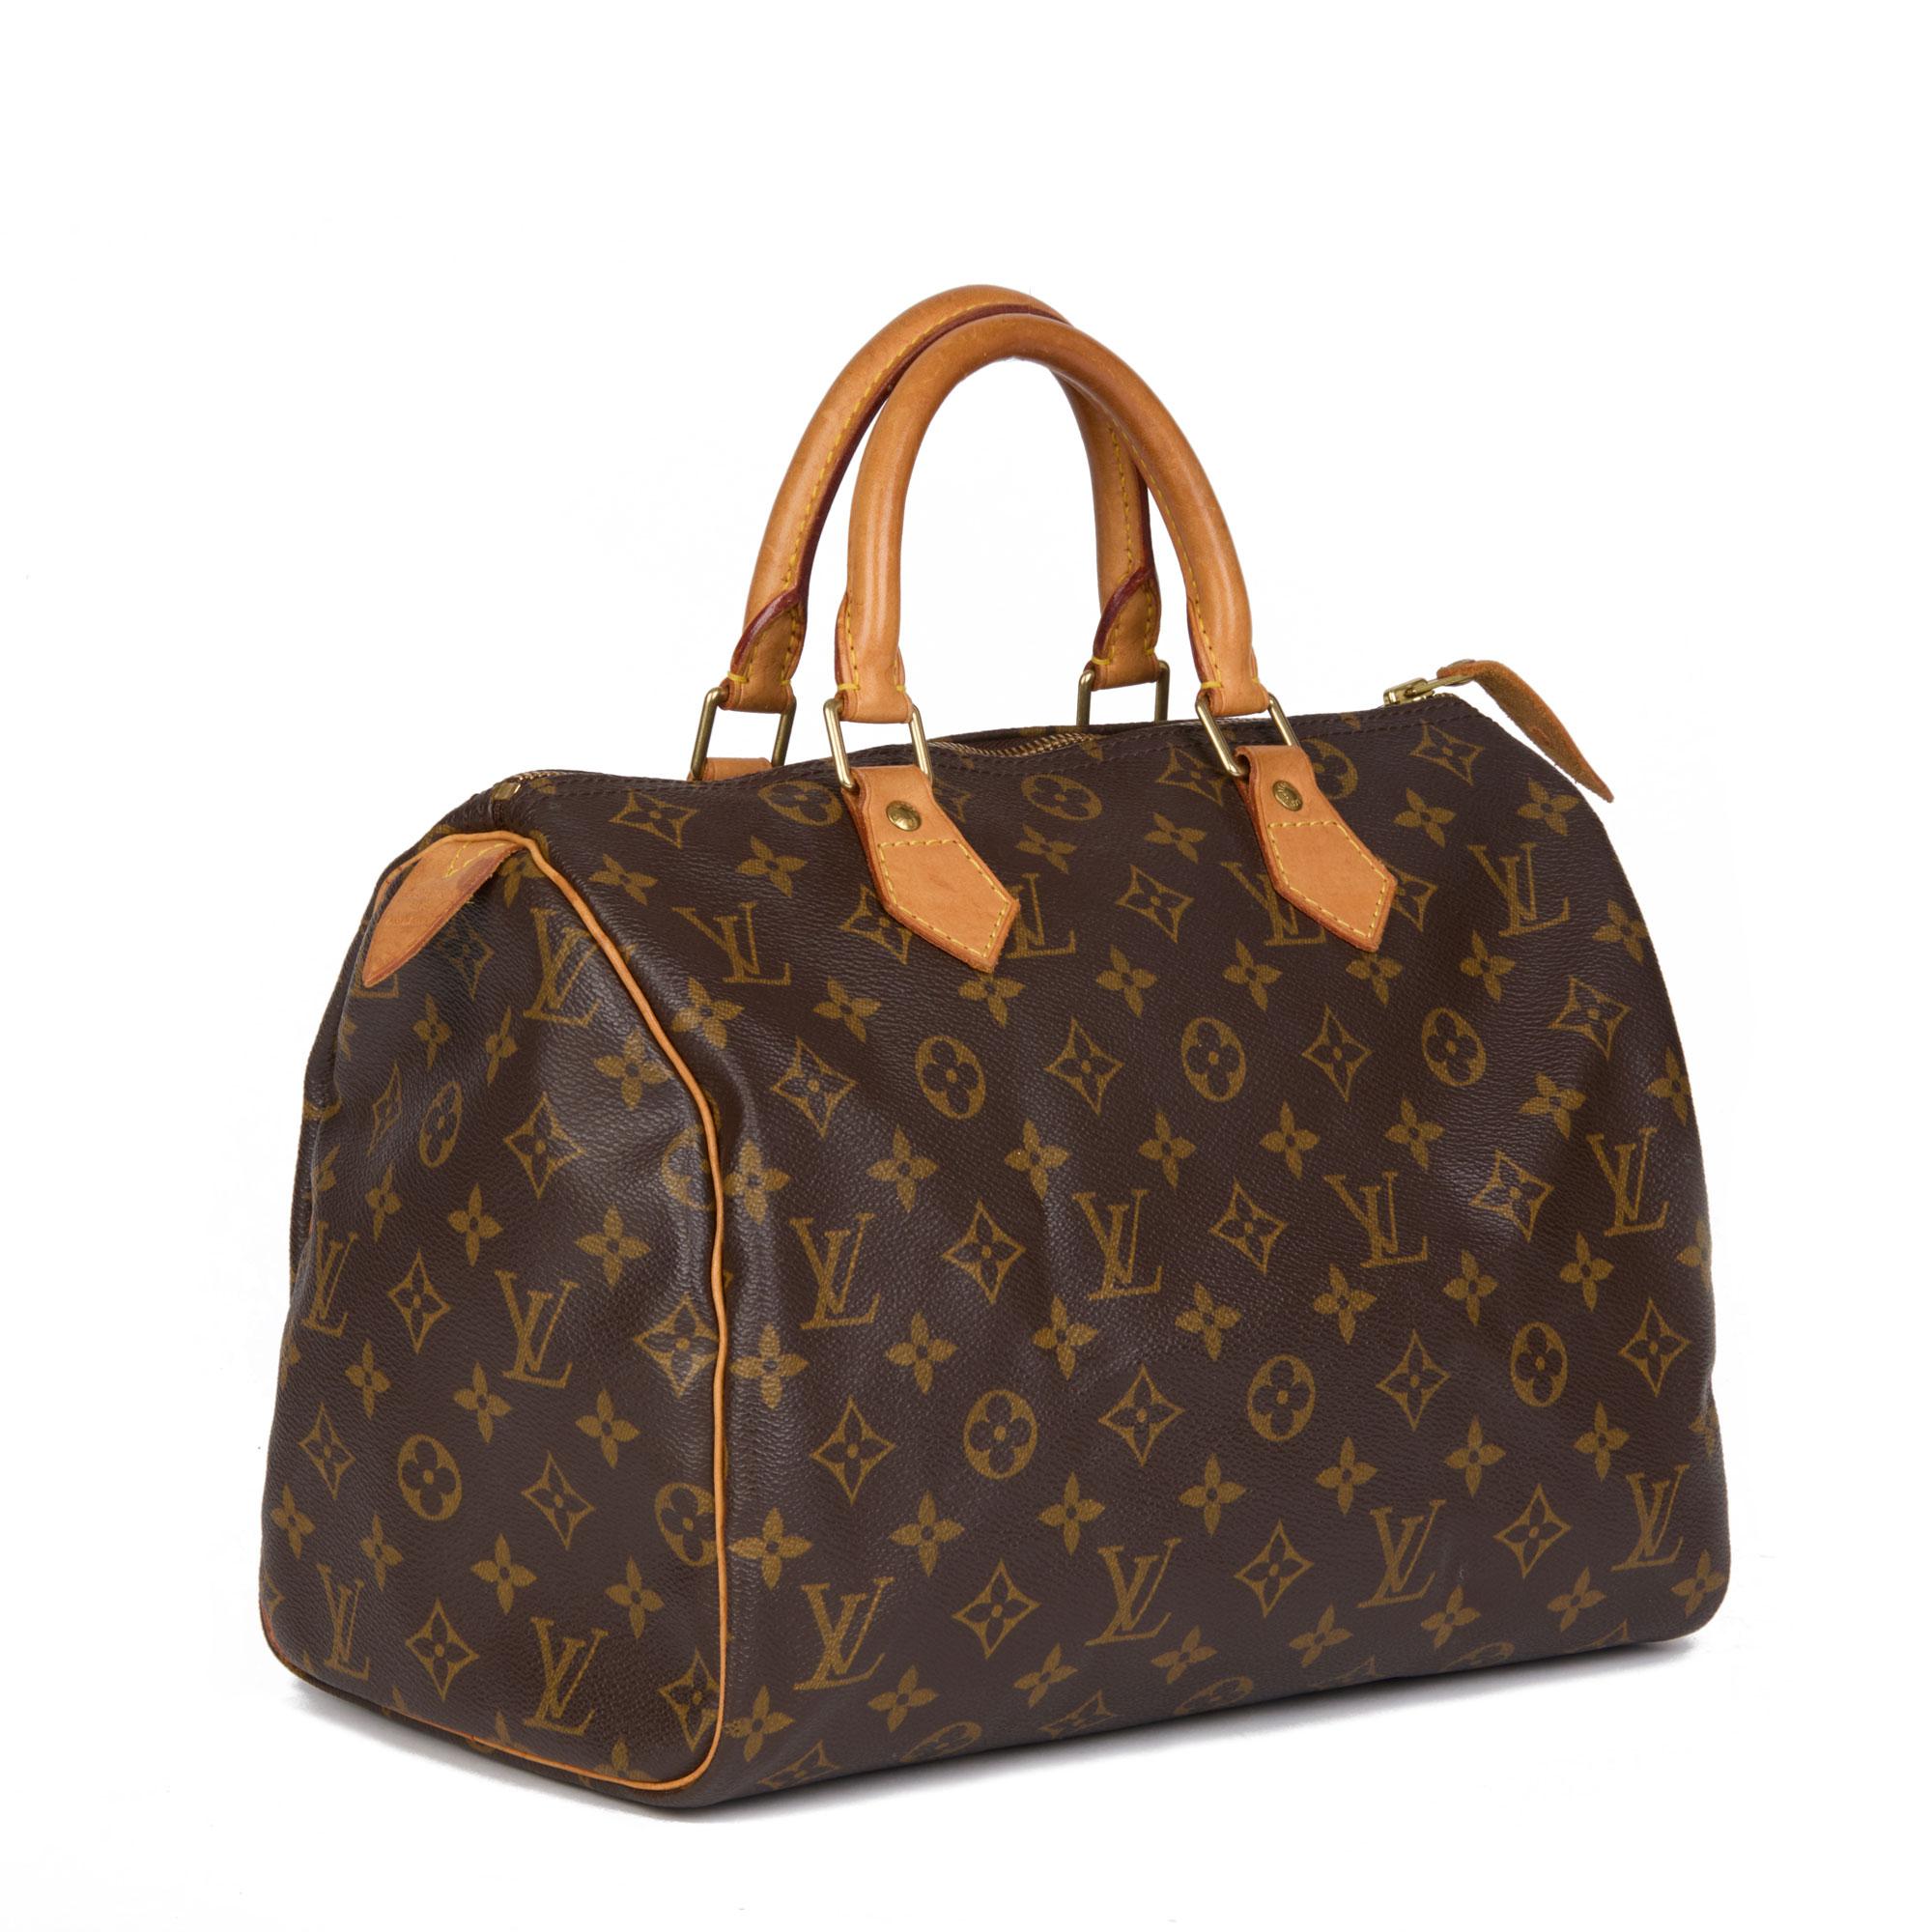 LOUIS VUITTON
Brown Monogram Coated Canvas & Vachetta Leather Speedy 30

Xupes Reference: HB4449
Serial Number: AA0044
Age (Circa): 2004
Authenticity Details: Date Stamp (Made in France)
Gender: Ladies
Type: Tote

Colour: Brown
Hardware: Golden